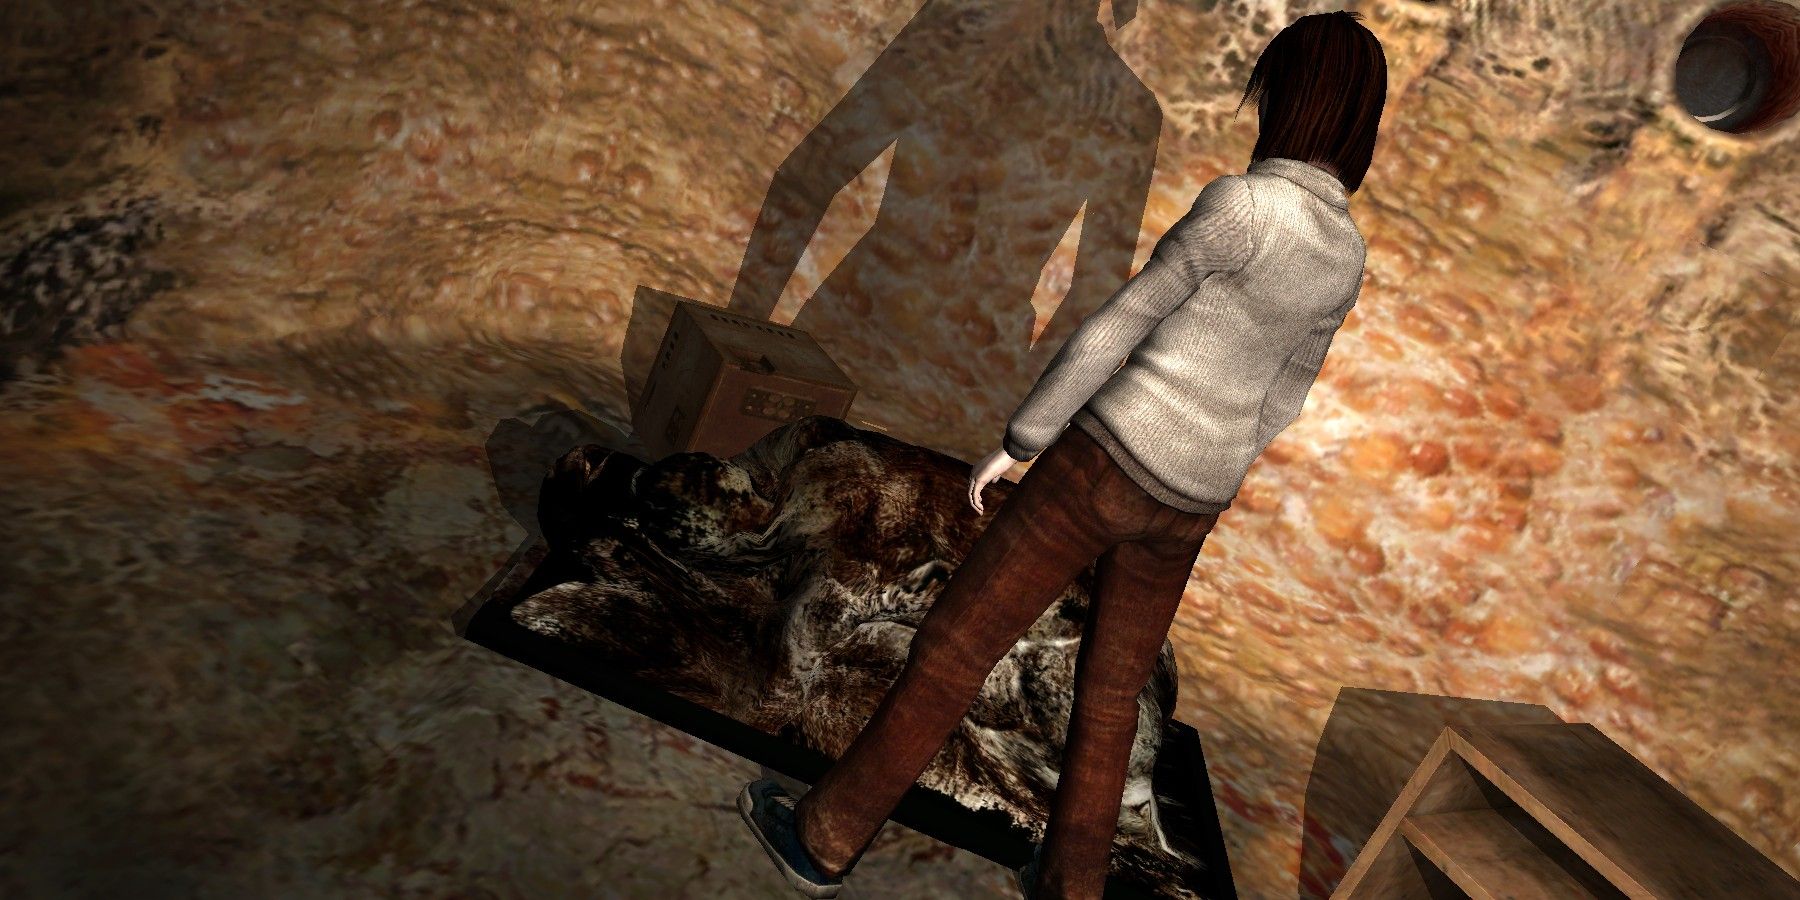 Angela struggles to confront an Abstract Daddy in Silent Hill 2